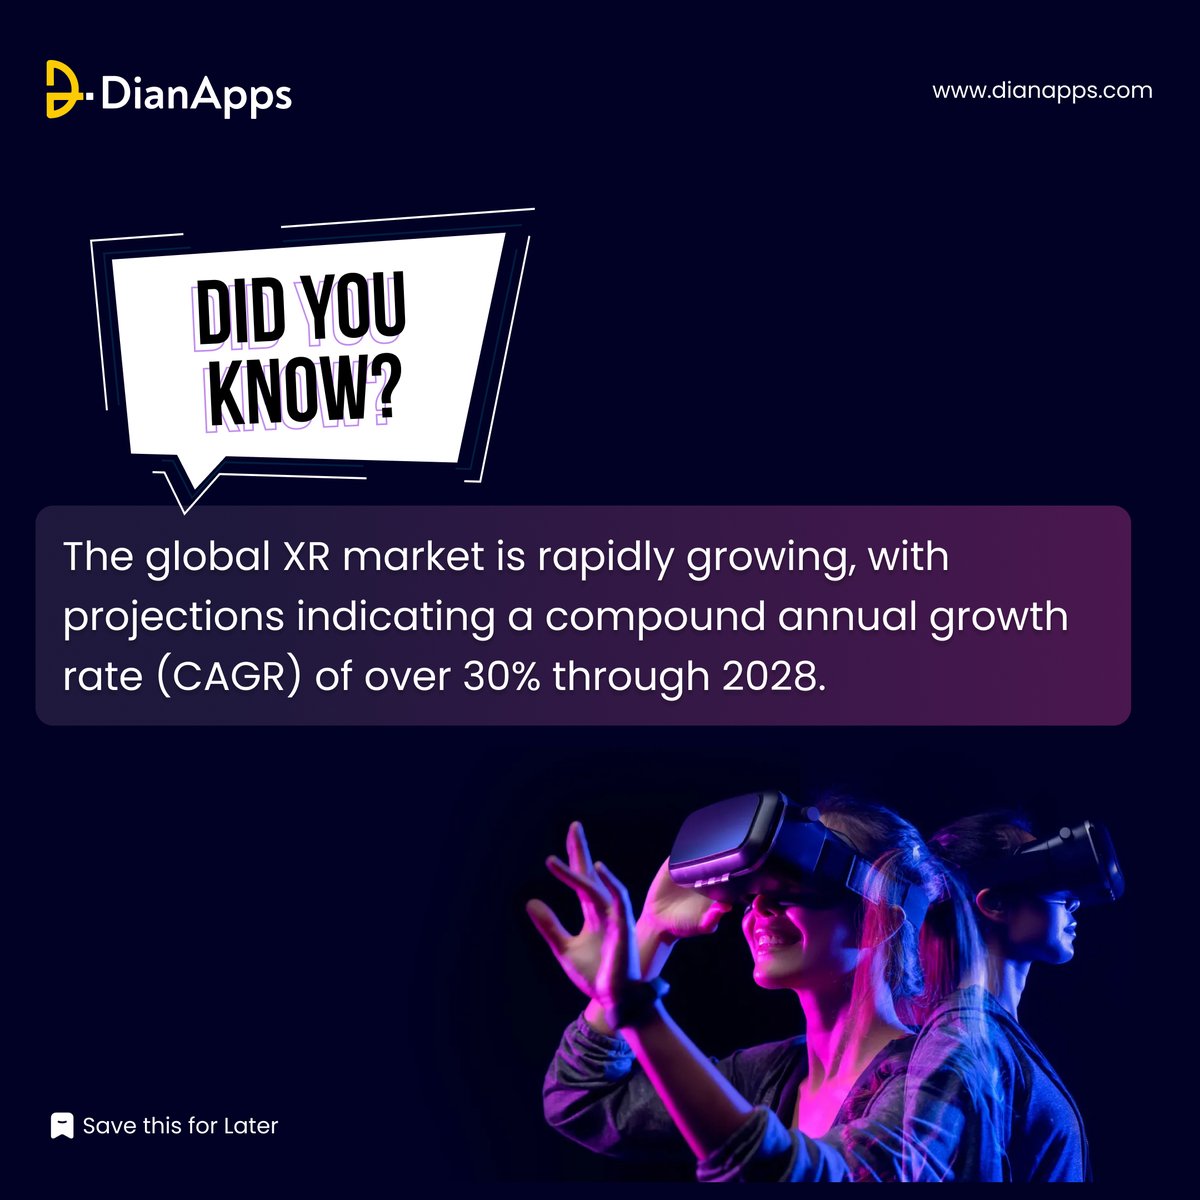 The global Extended Reality (XR) market, encompassing Virtual Reality, Augmented Reality, and Mixed Reality, is on a steep rise, with a projected annual growth rate of over 30% until 2028. 

#xr #extendedreality #dianapps #innovation #growthmindset